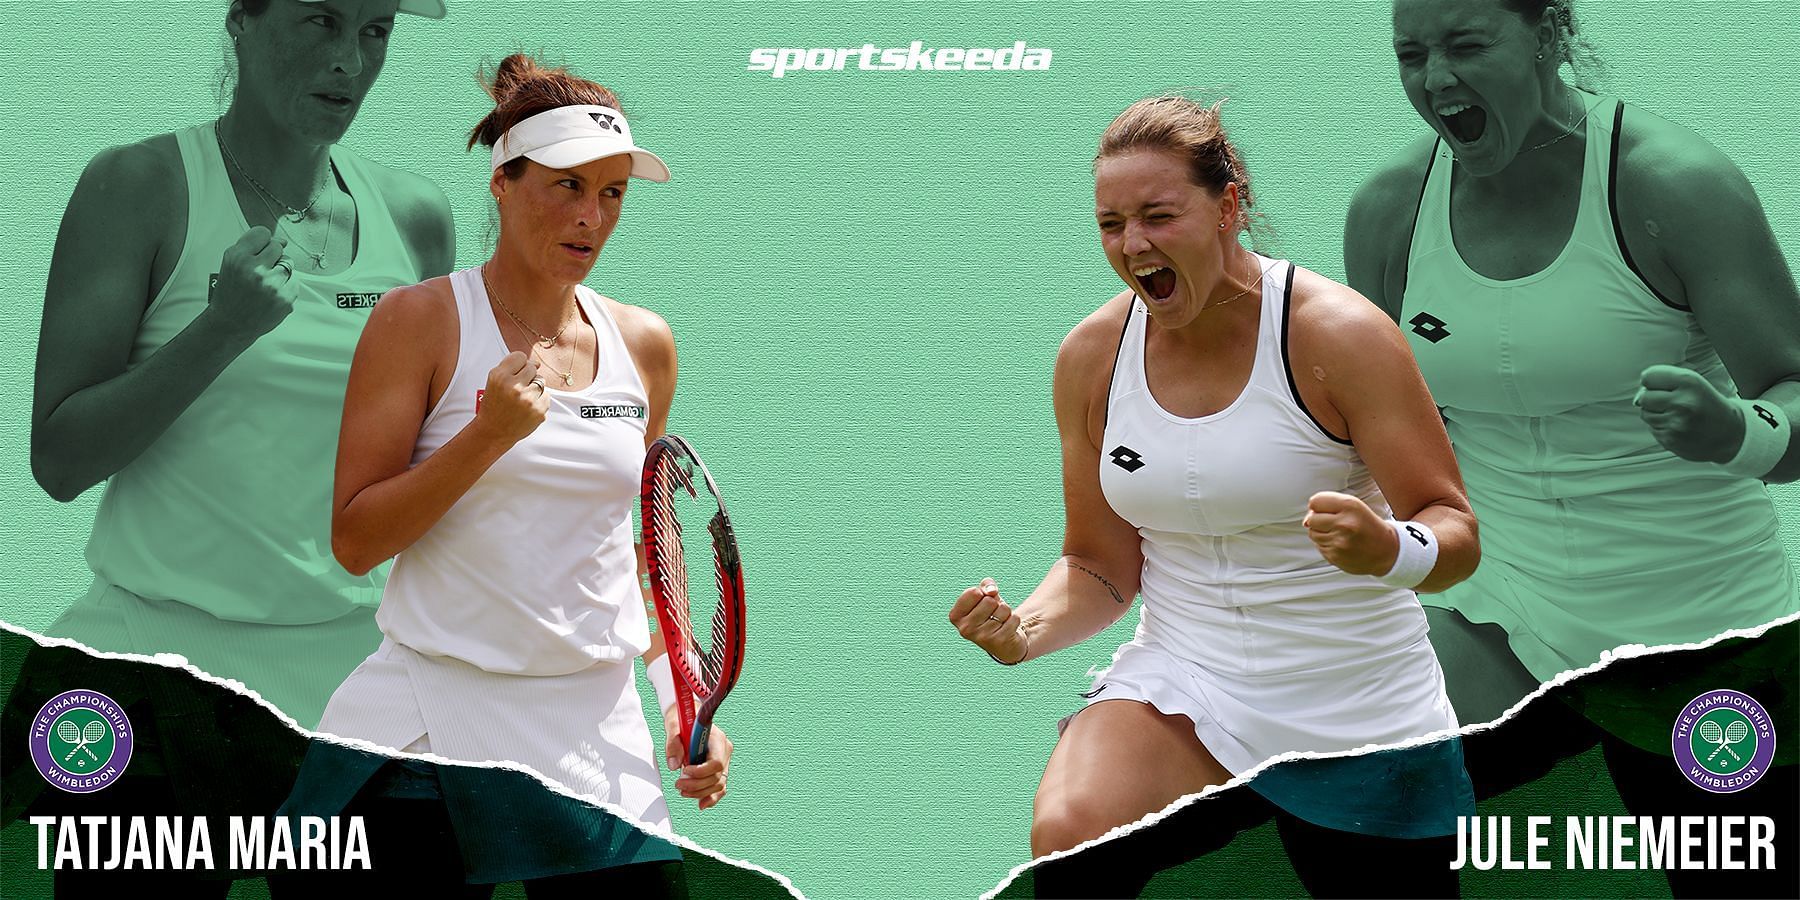 Maria and Niemeier are vying for their first Grand Slam semifinal